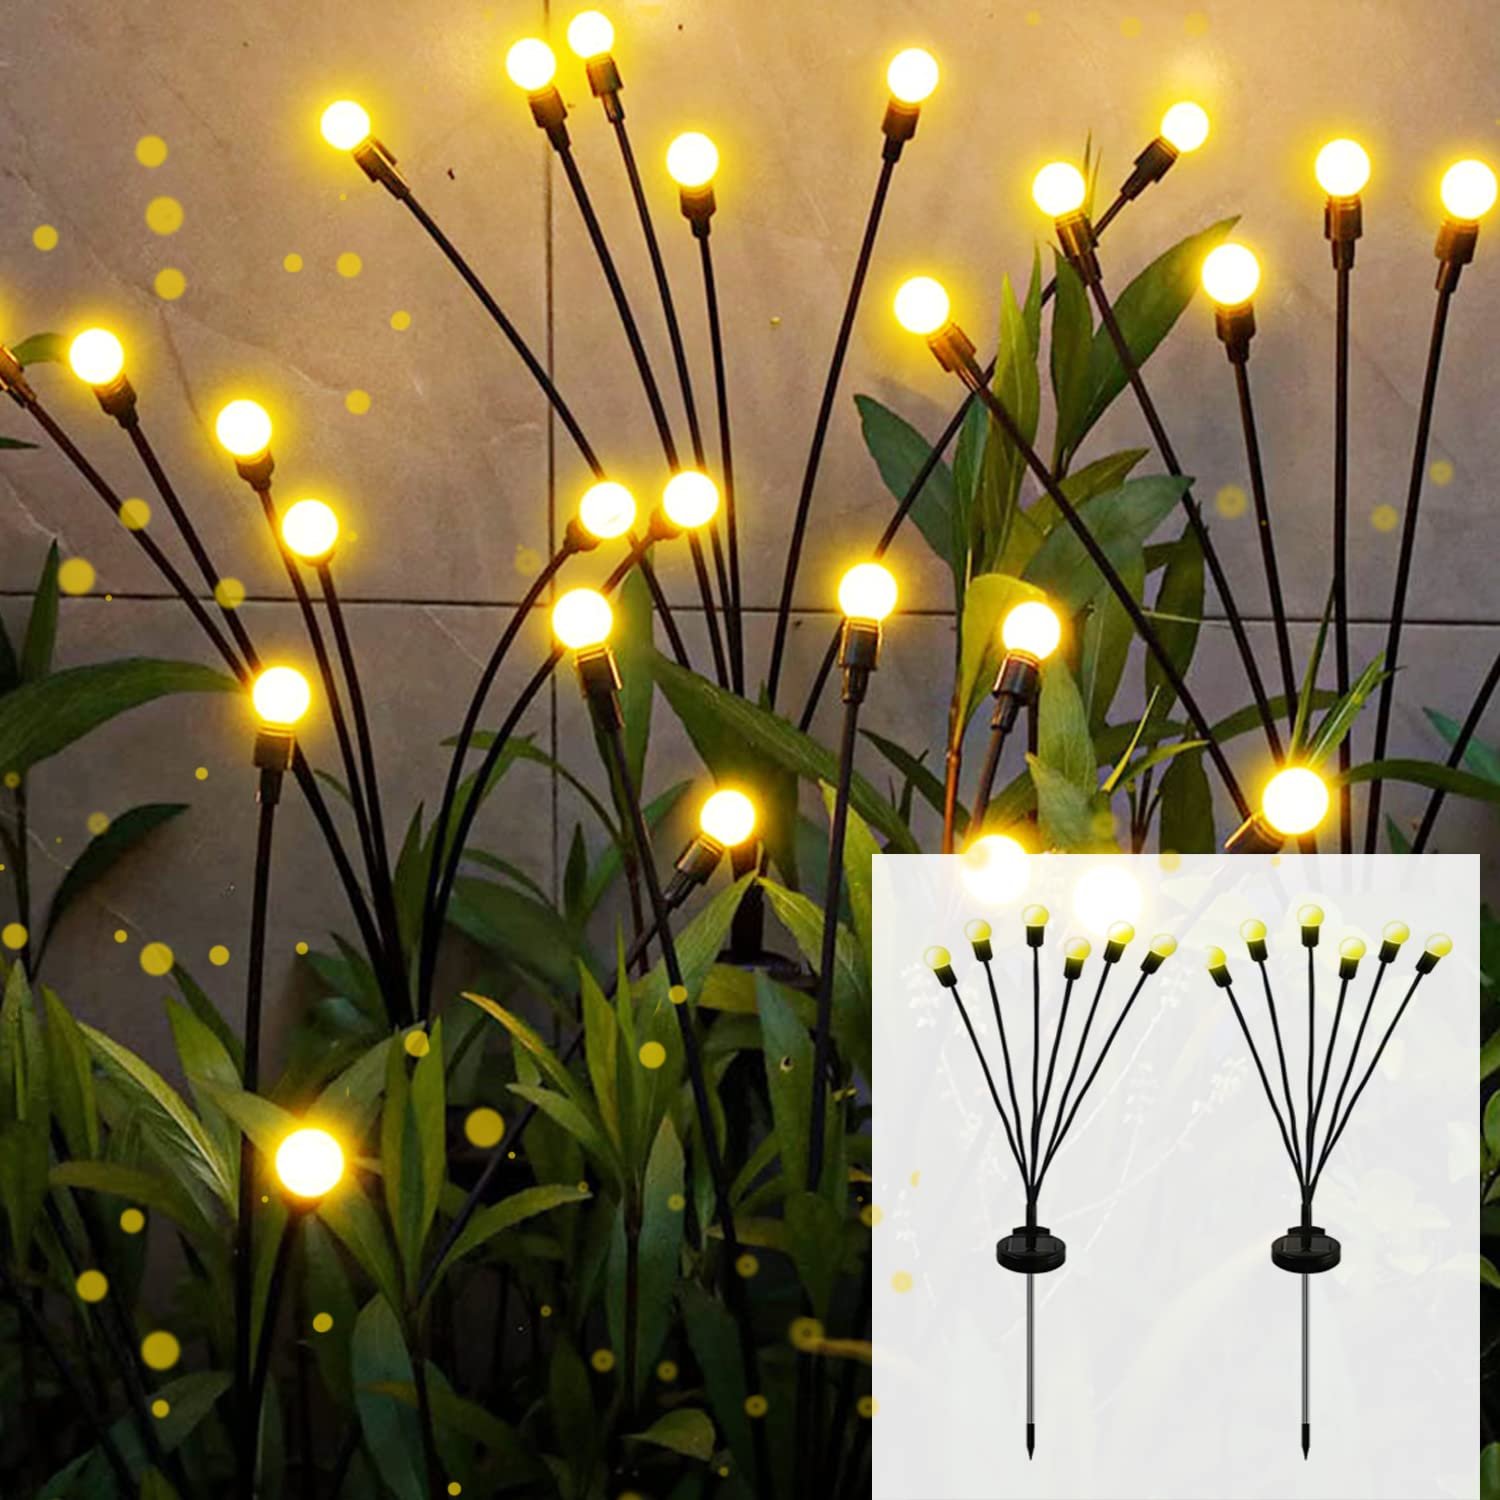 Solar-Powered Lights for the Outdoors and Gardens